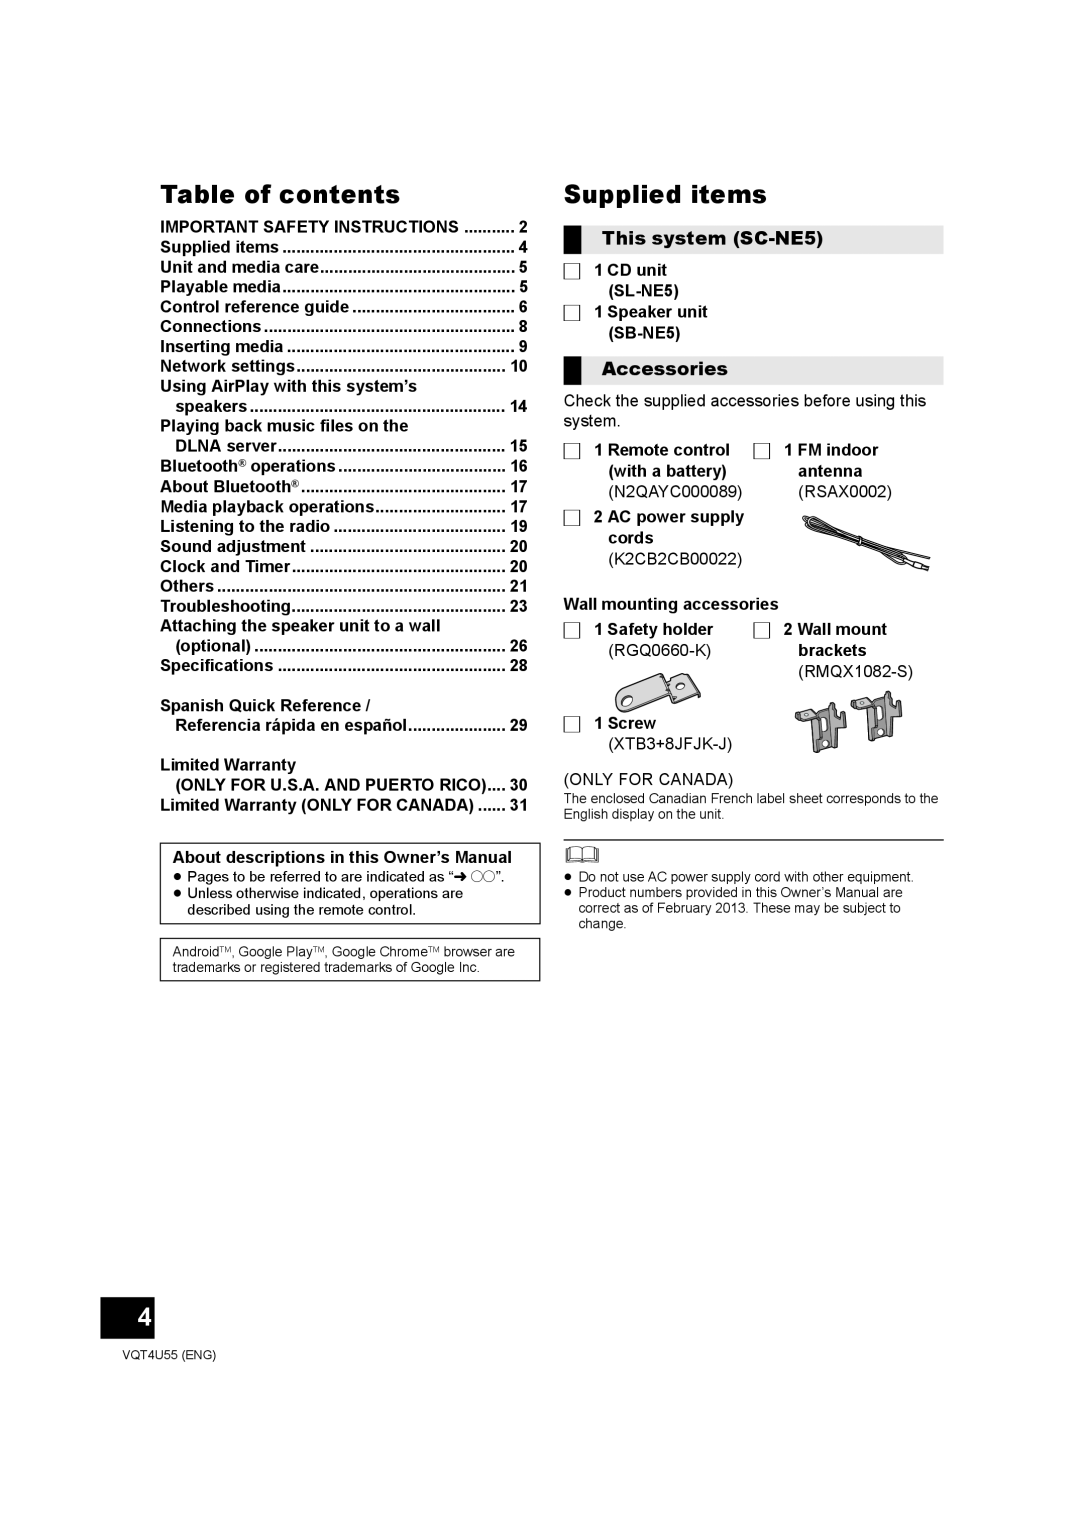 Panasonic owner manual Table of contents, Supplied items, This system SC-NE5, Accessories 